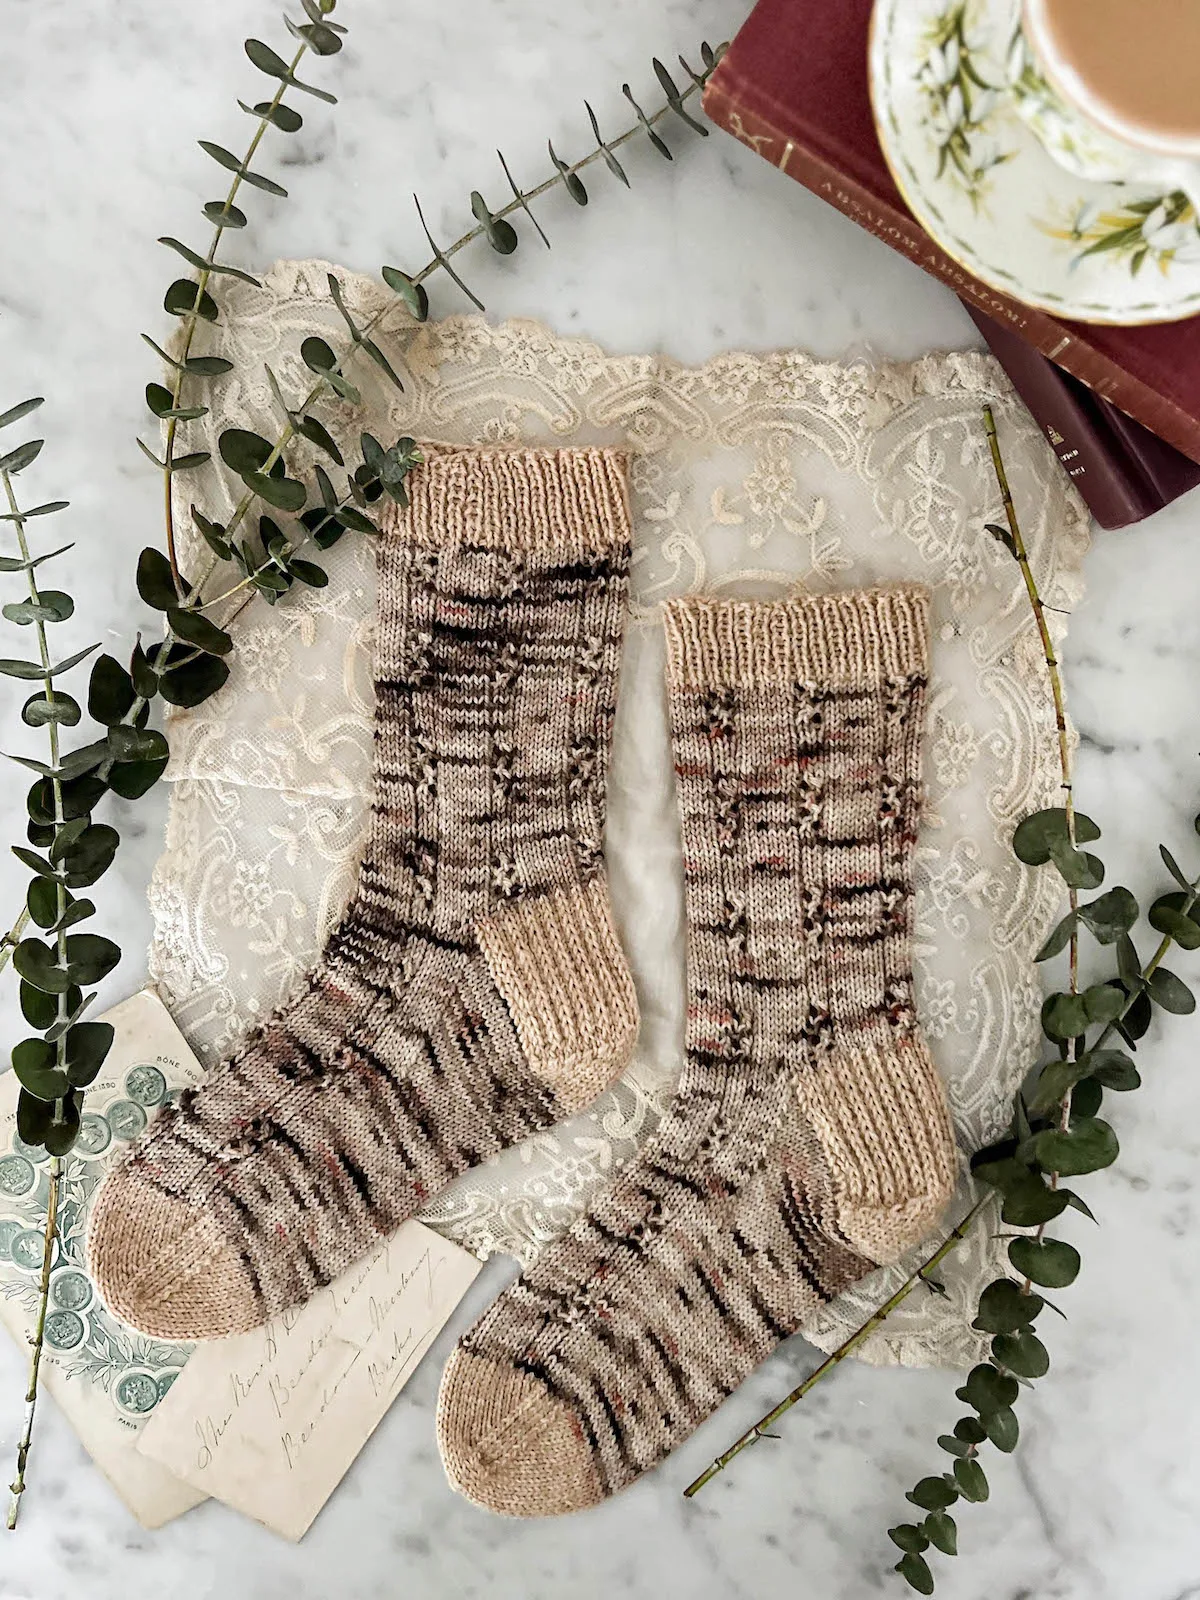 A pair of speckled socks is laid out out flat on a white marble countertop with the toes pointing to the left. The socks are knit in a pattern that alternates columns of stockinette stitch with columns of ribbed eyelets. The socks are surrounded by small eucalyptus branches, antique books, and a lace handkerchief.